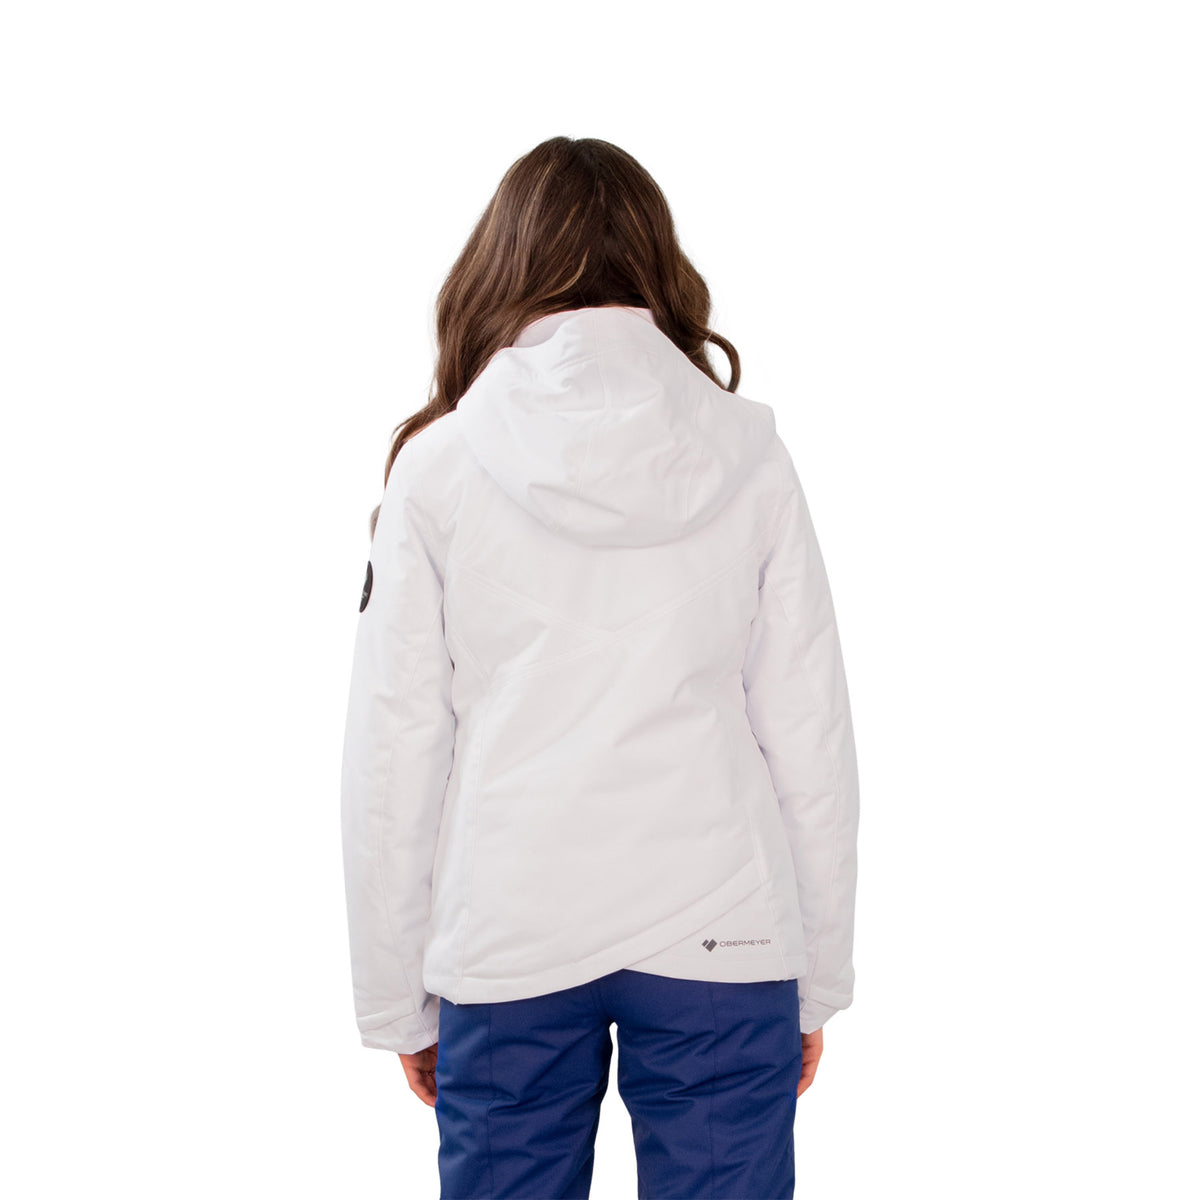 Image features the back of a female model wearing the Obermeyer Rylee Jacket in white with blue ski pants.